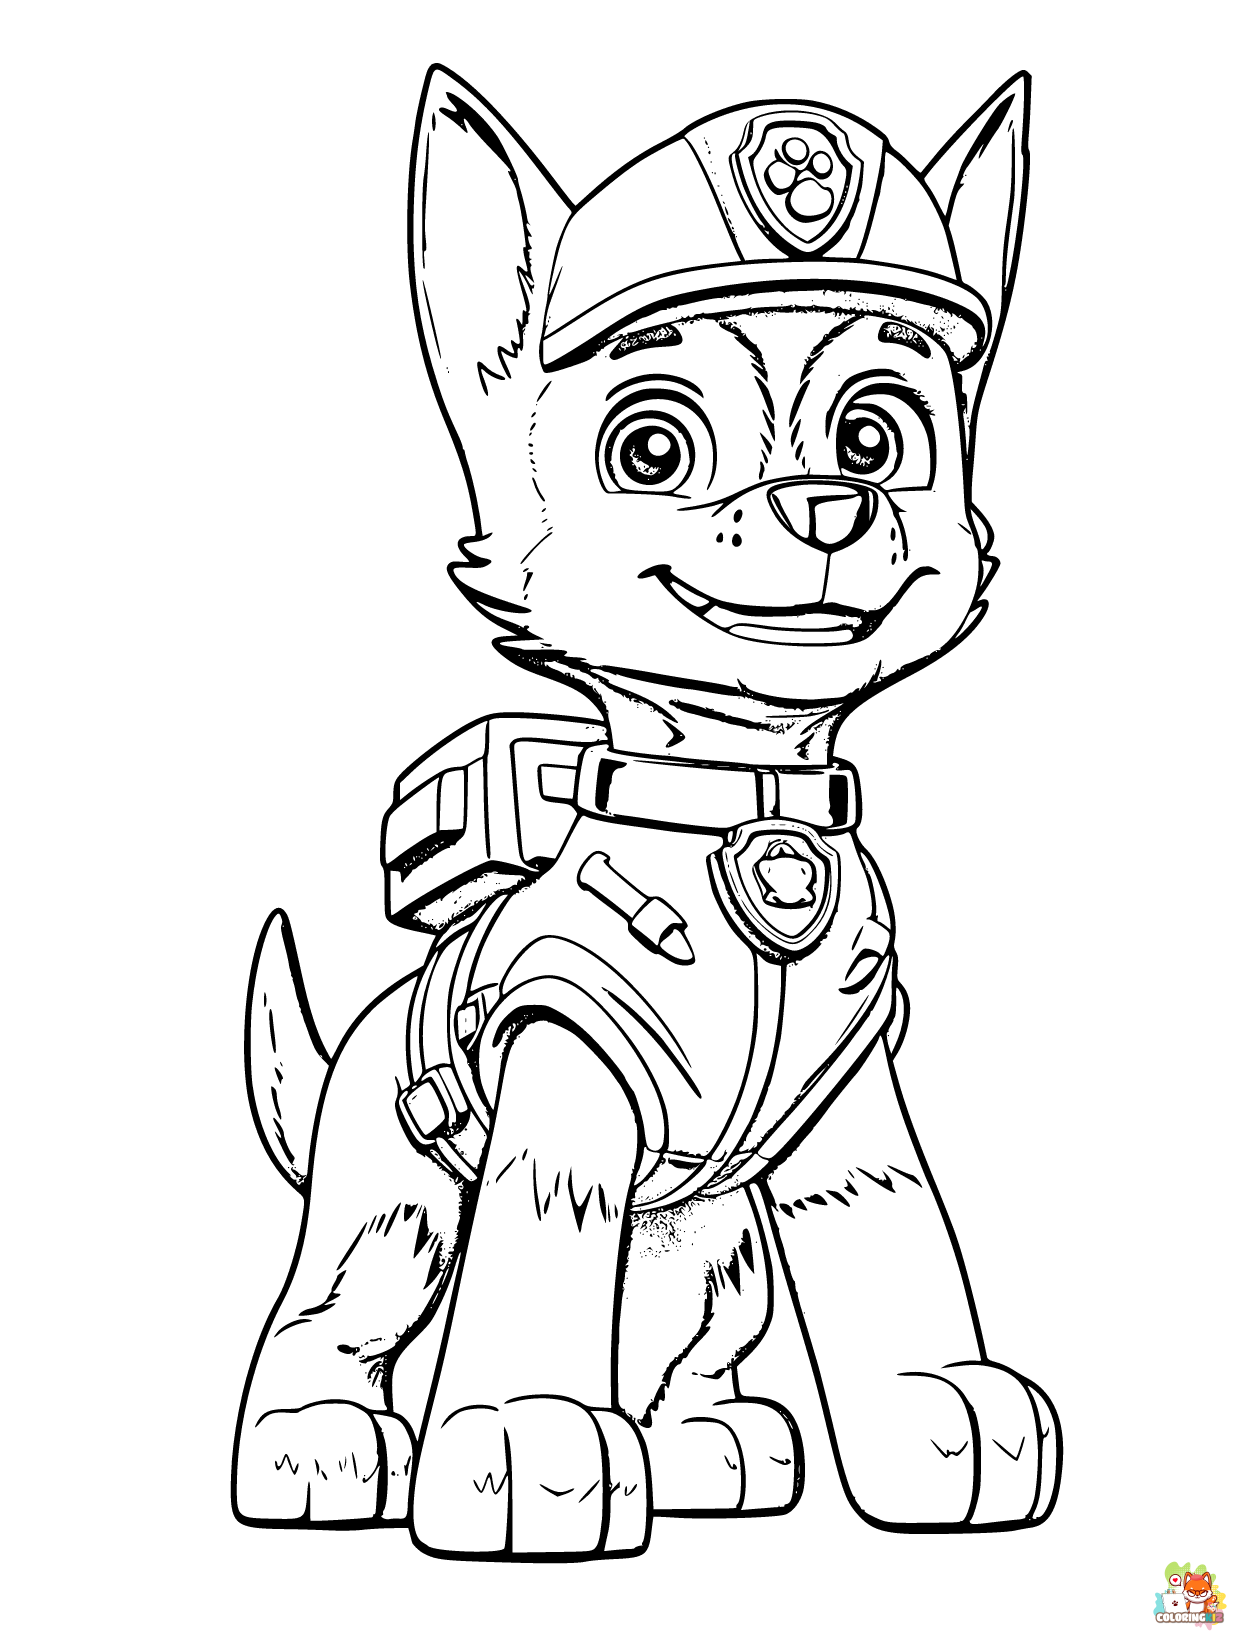 Paw Patrol Coloring Pages easy 1